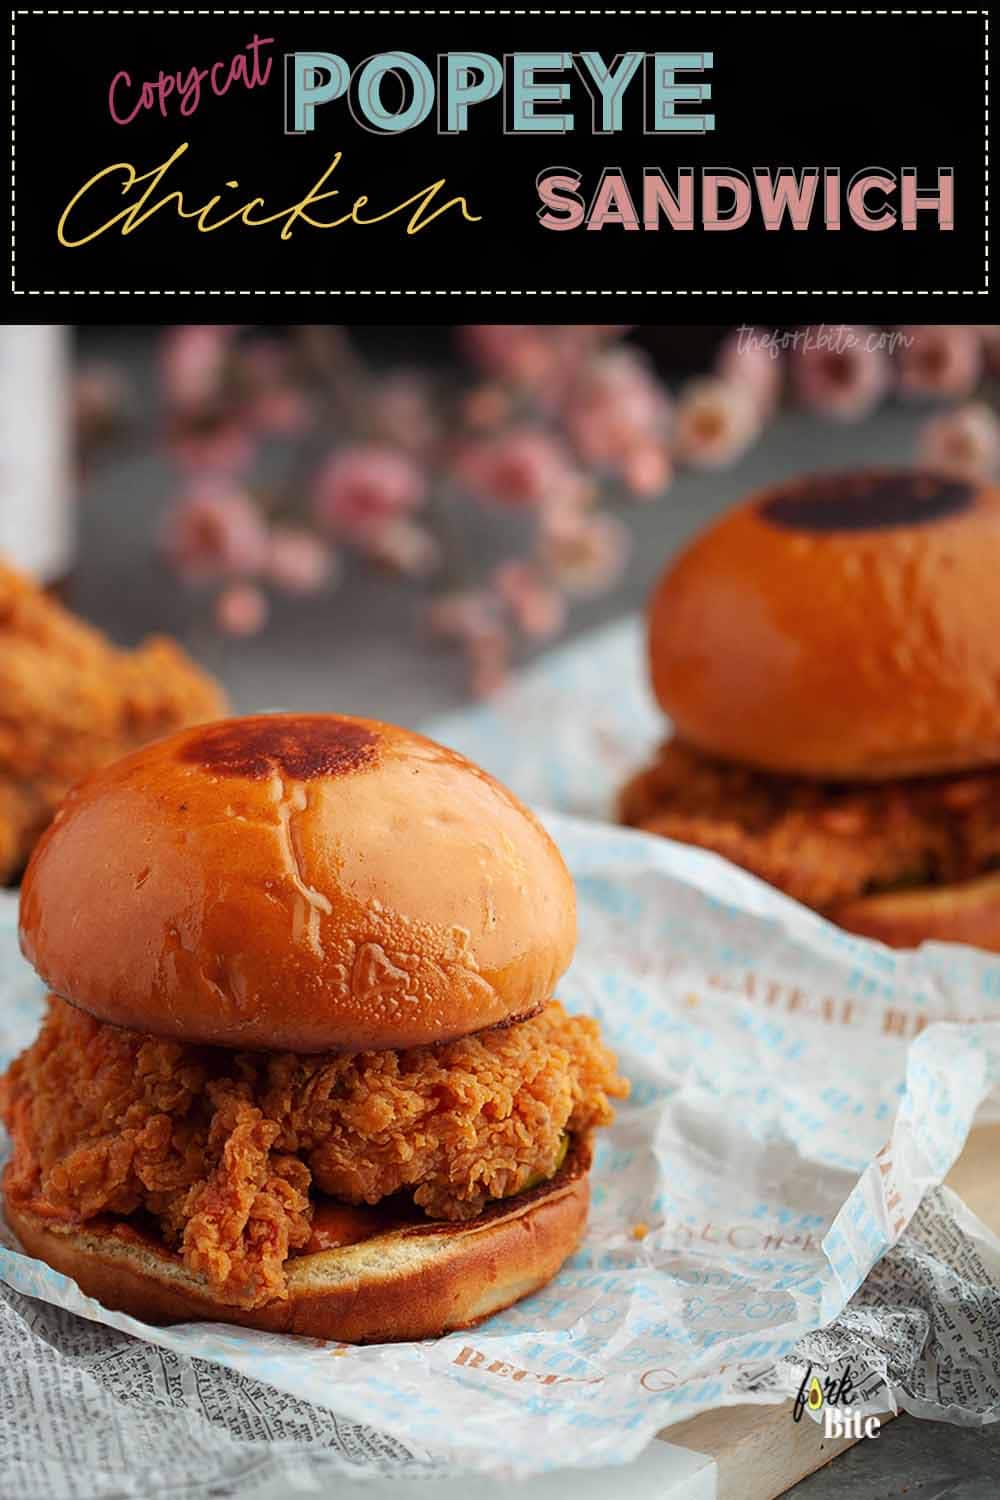 Do you like Popeye chicken? We're bringing you a copycat Popeye Chicken sandwich that is crunchy of golden deliciousness. Now you can whip up your version at home sans the long lines.